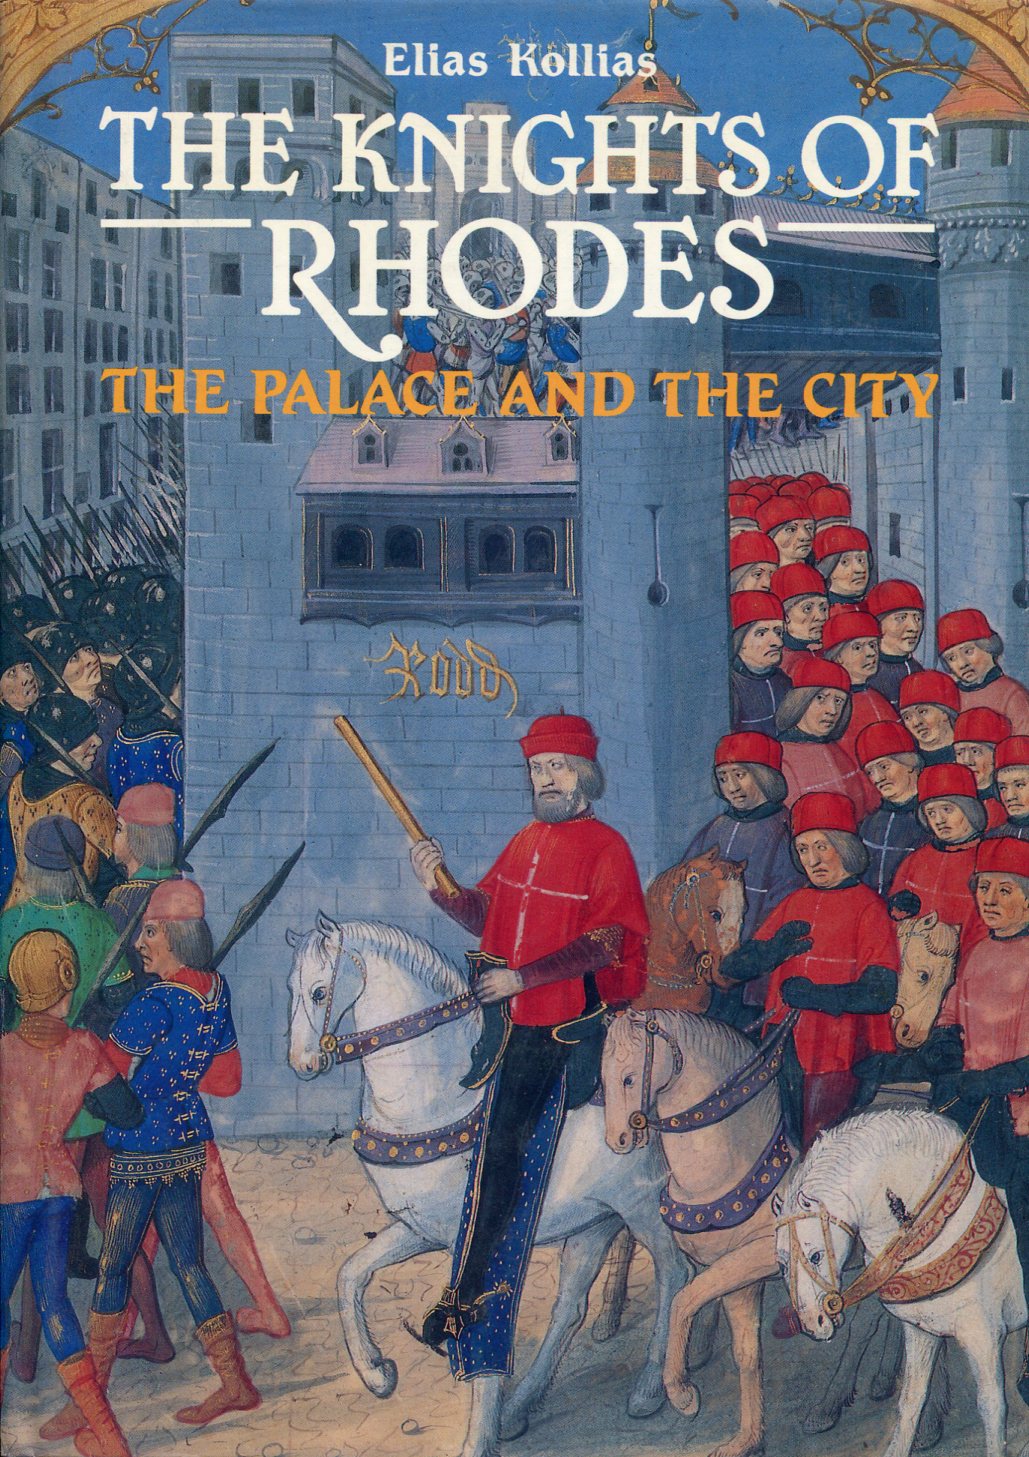 THE KNIGHTS OF RHODES